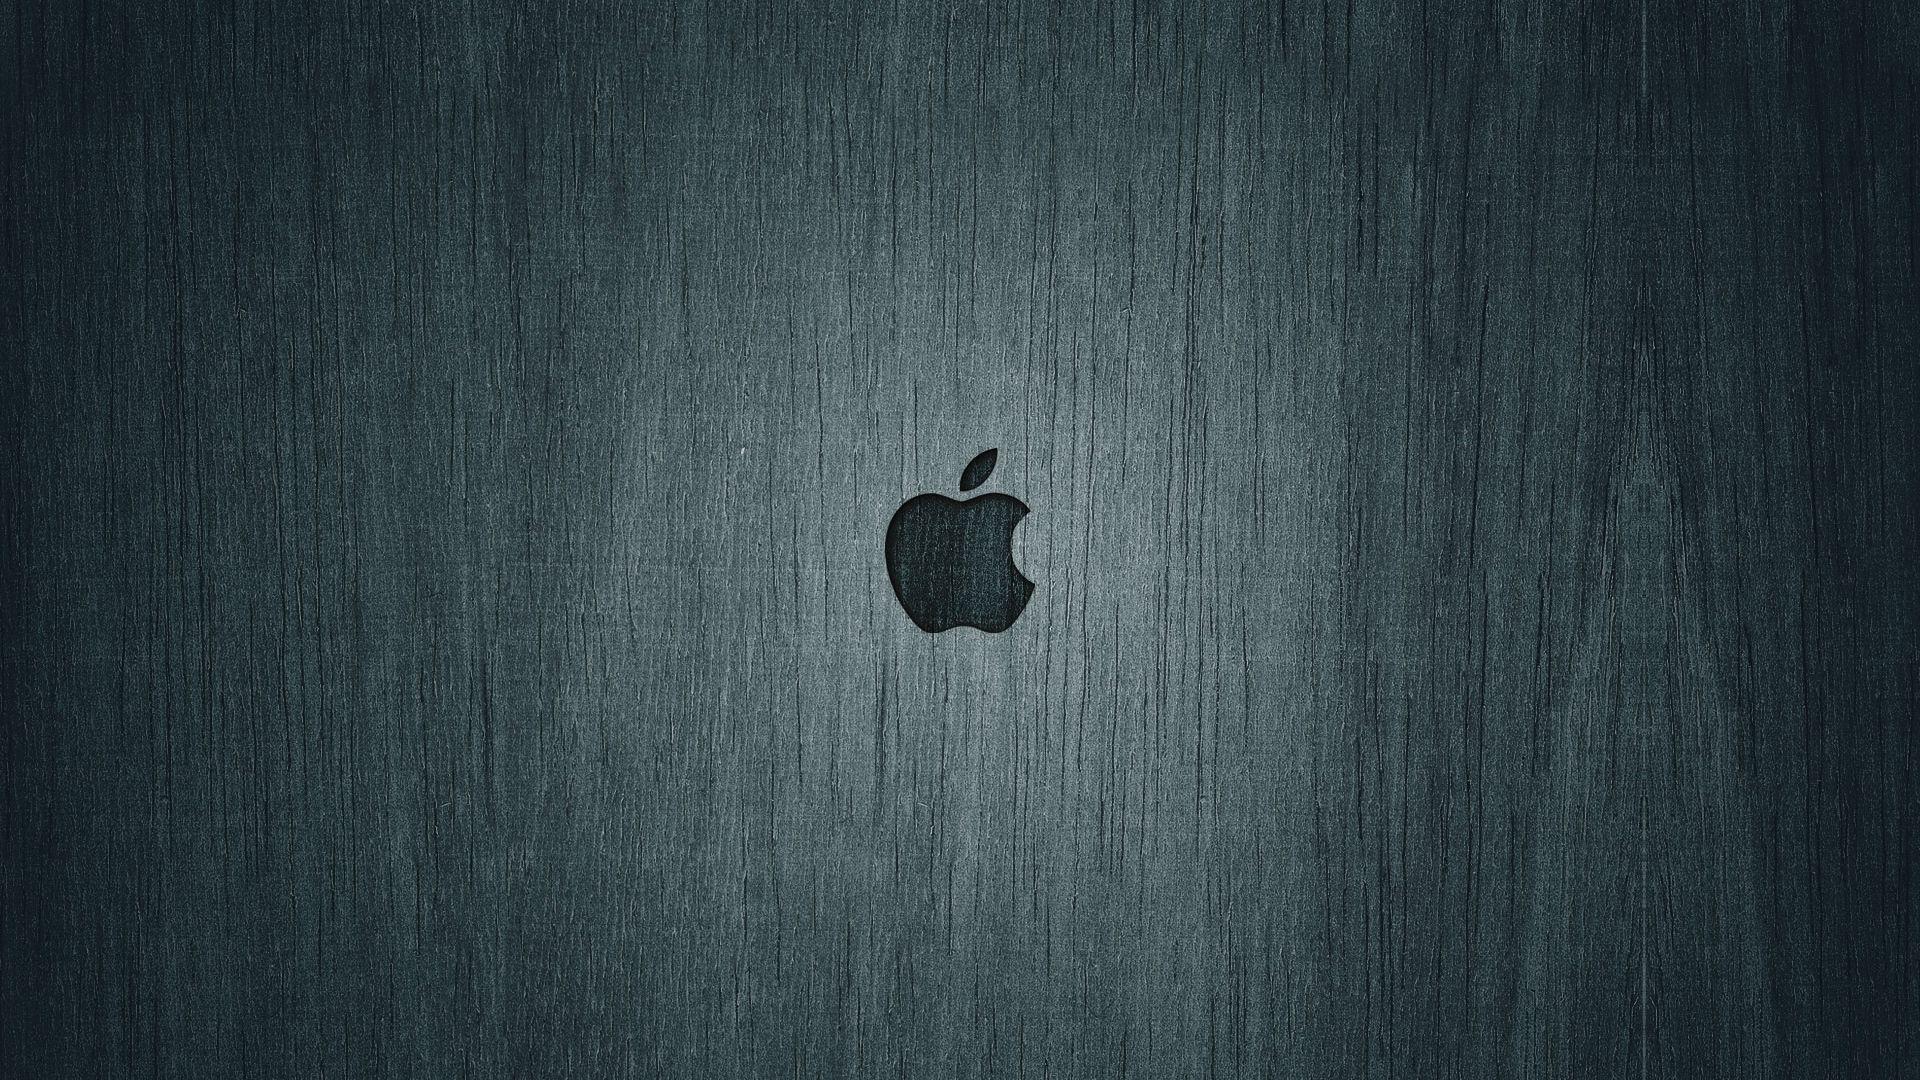 HD Backgrounds Apple - Wallpaper Cave